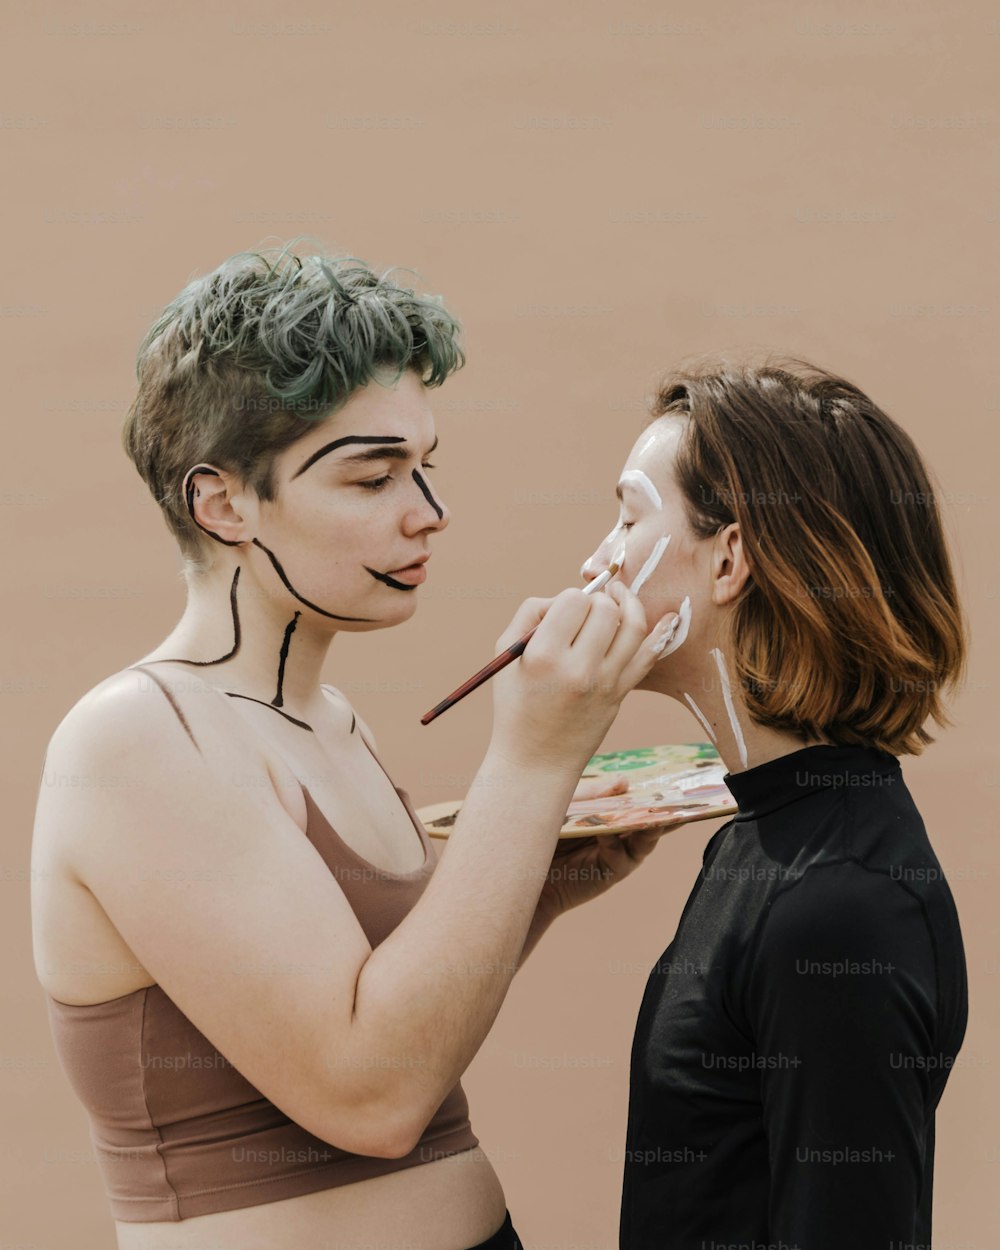 a woman is painting another woman's face with white paint